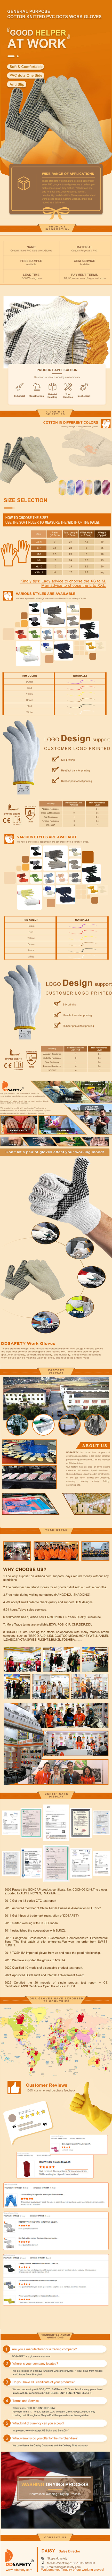 Cotton Polyester String Knit Safety Protection Work Gloves for Painter Mechanic Industrial Warehouse Gardening Construction - DKP408 Cotton Polyester String Knit Safety Protection Work Gloves for Painter Mechanic Industrial Warehouse Gardening Construction - DKP408 gloves,work gloves,cotton work gloves,pvc dot gloves,pvc dotted gloves